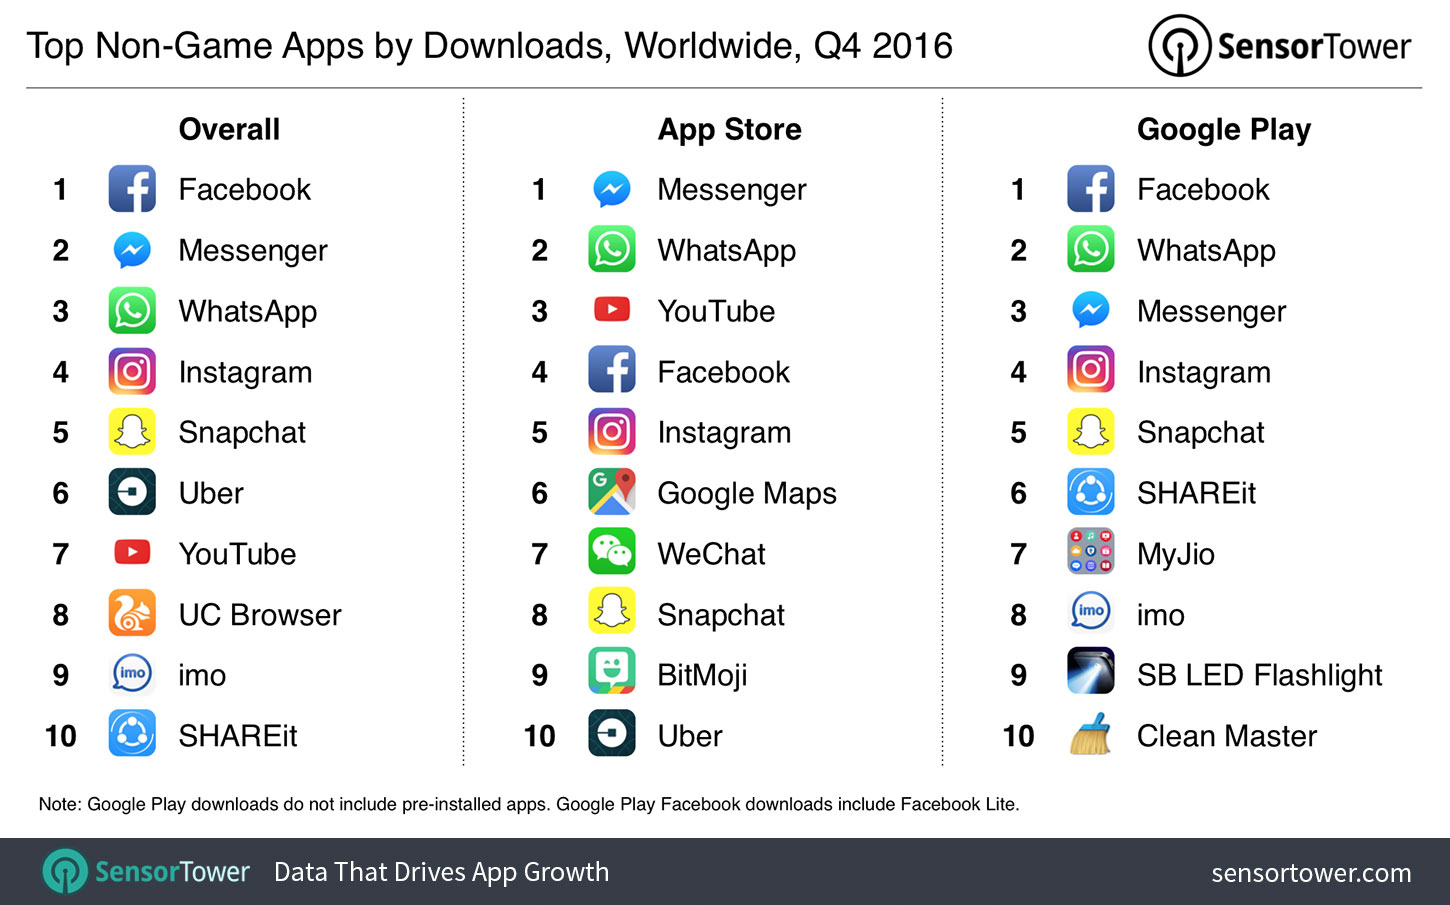 Q4 2016's Top Mobile Apps by Downloads